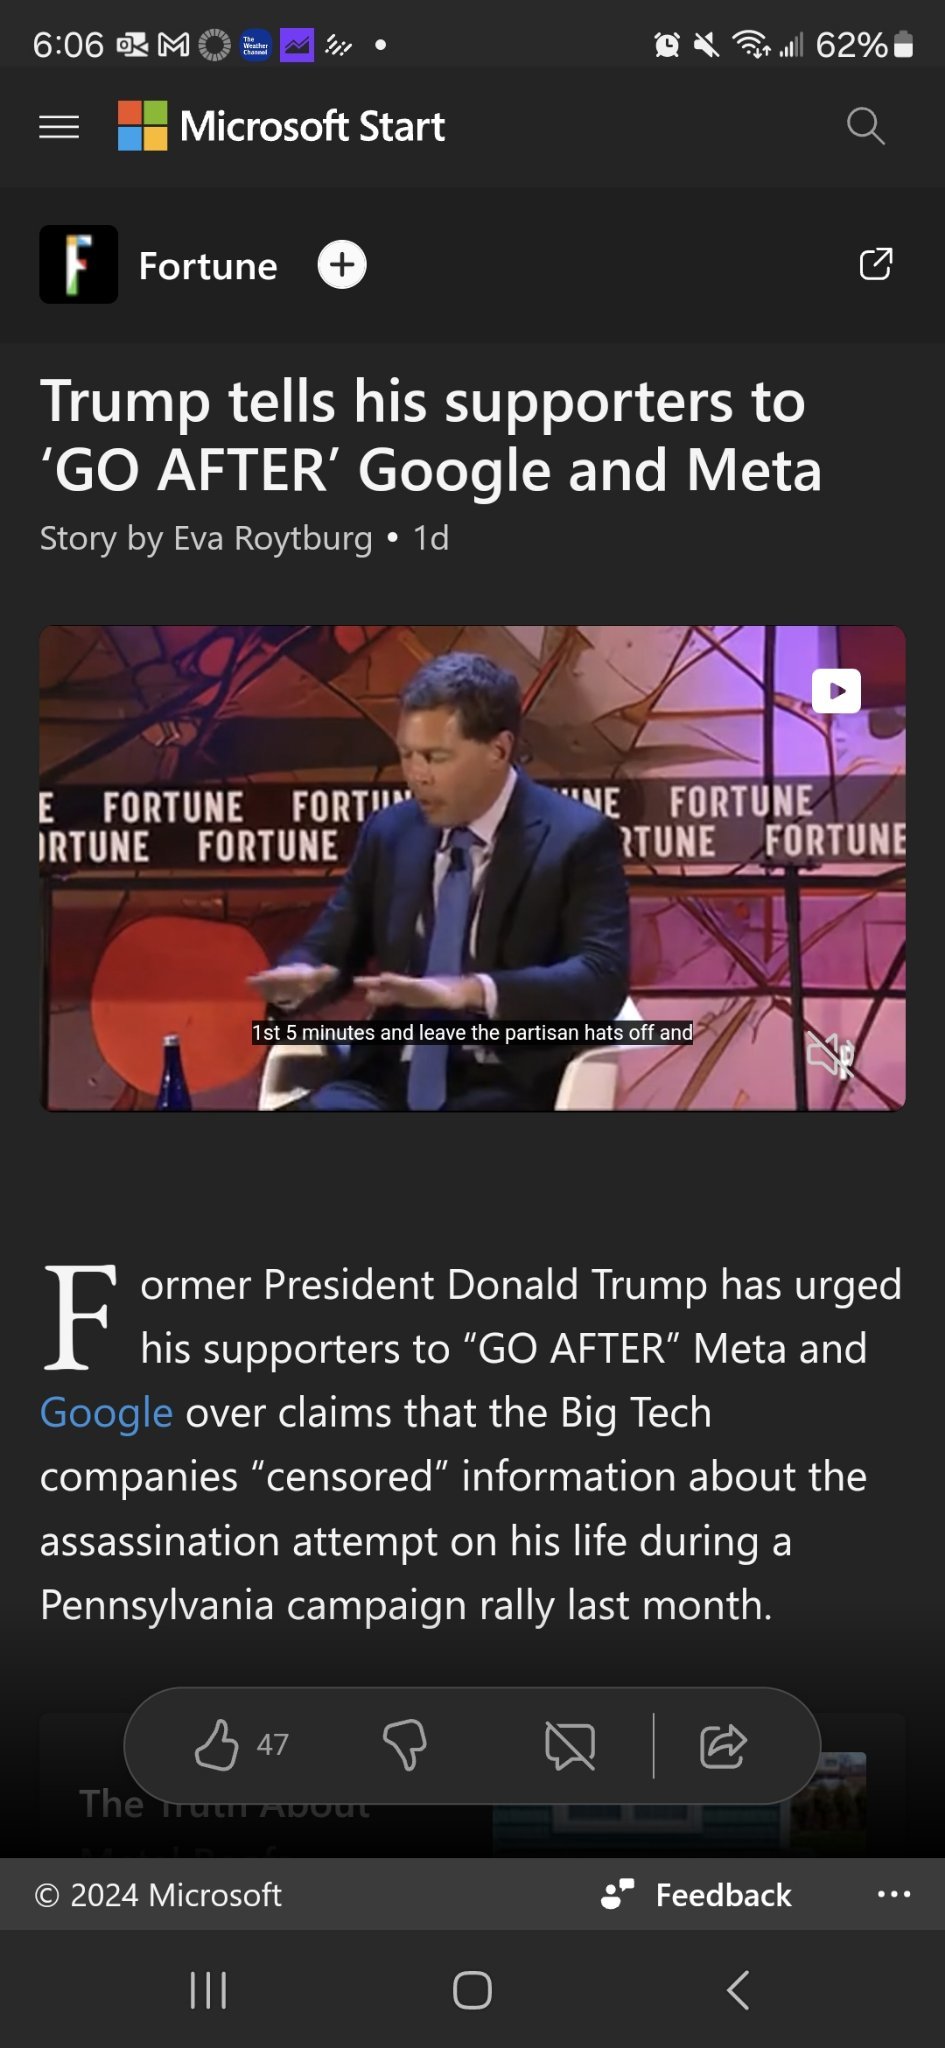 $Trump Media & Technology (DJT.US)$ once again. as an investor why the fk would you want him back when he attacks big tech companies  https://youtu.be/kw-h9gS4N...